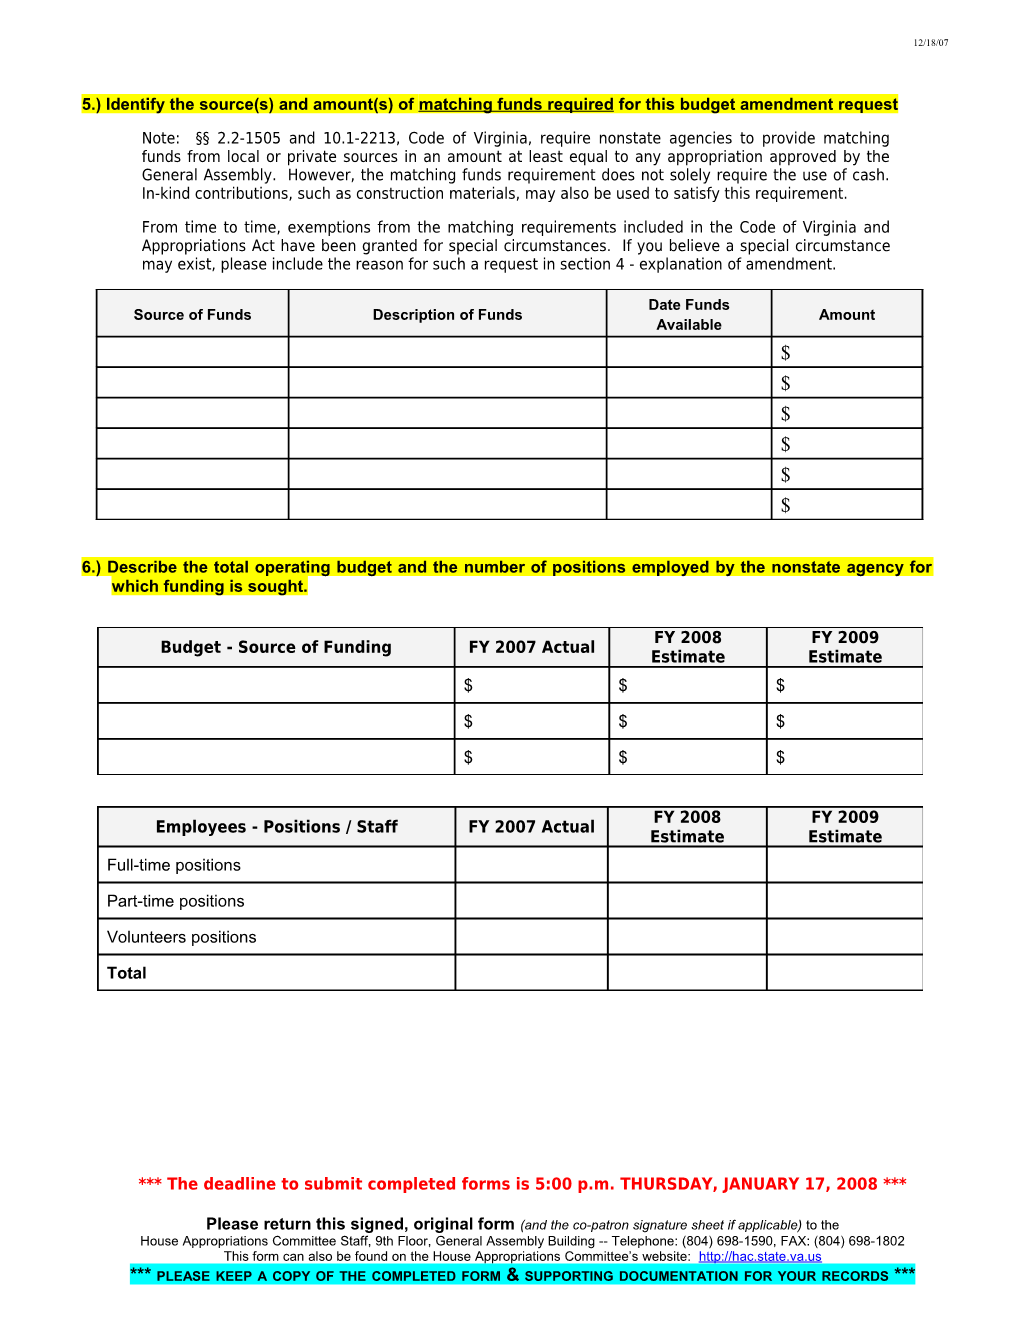 2008 Session Nonstate Agency Budget Amendment Request Form